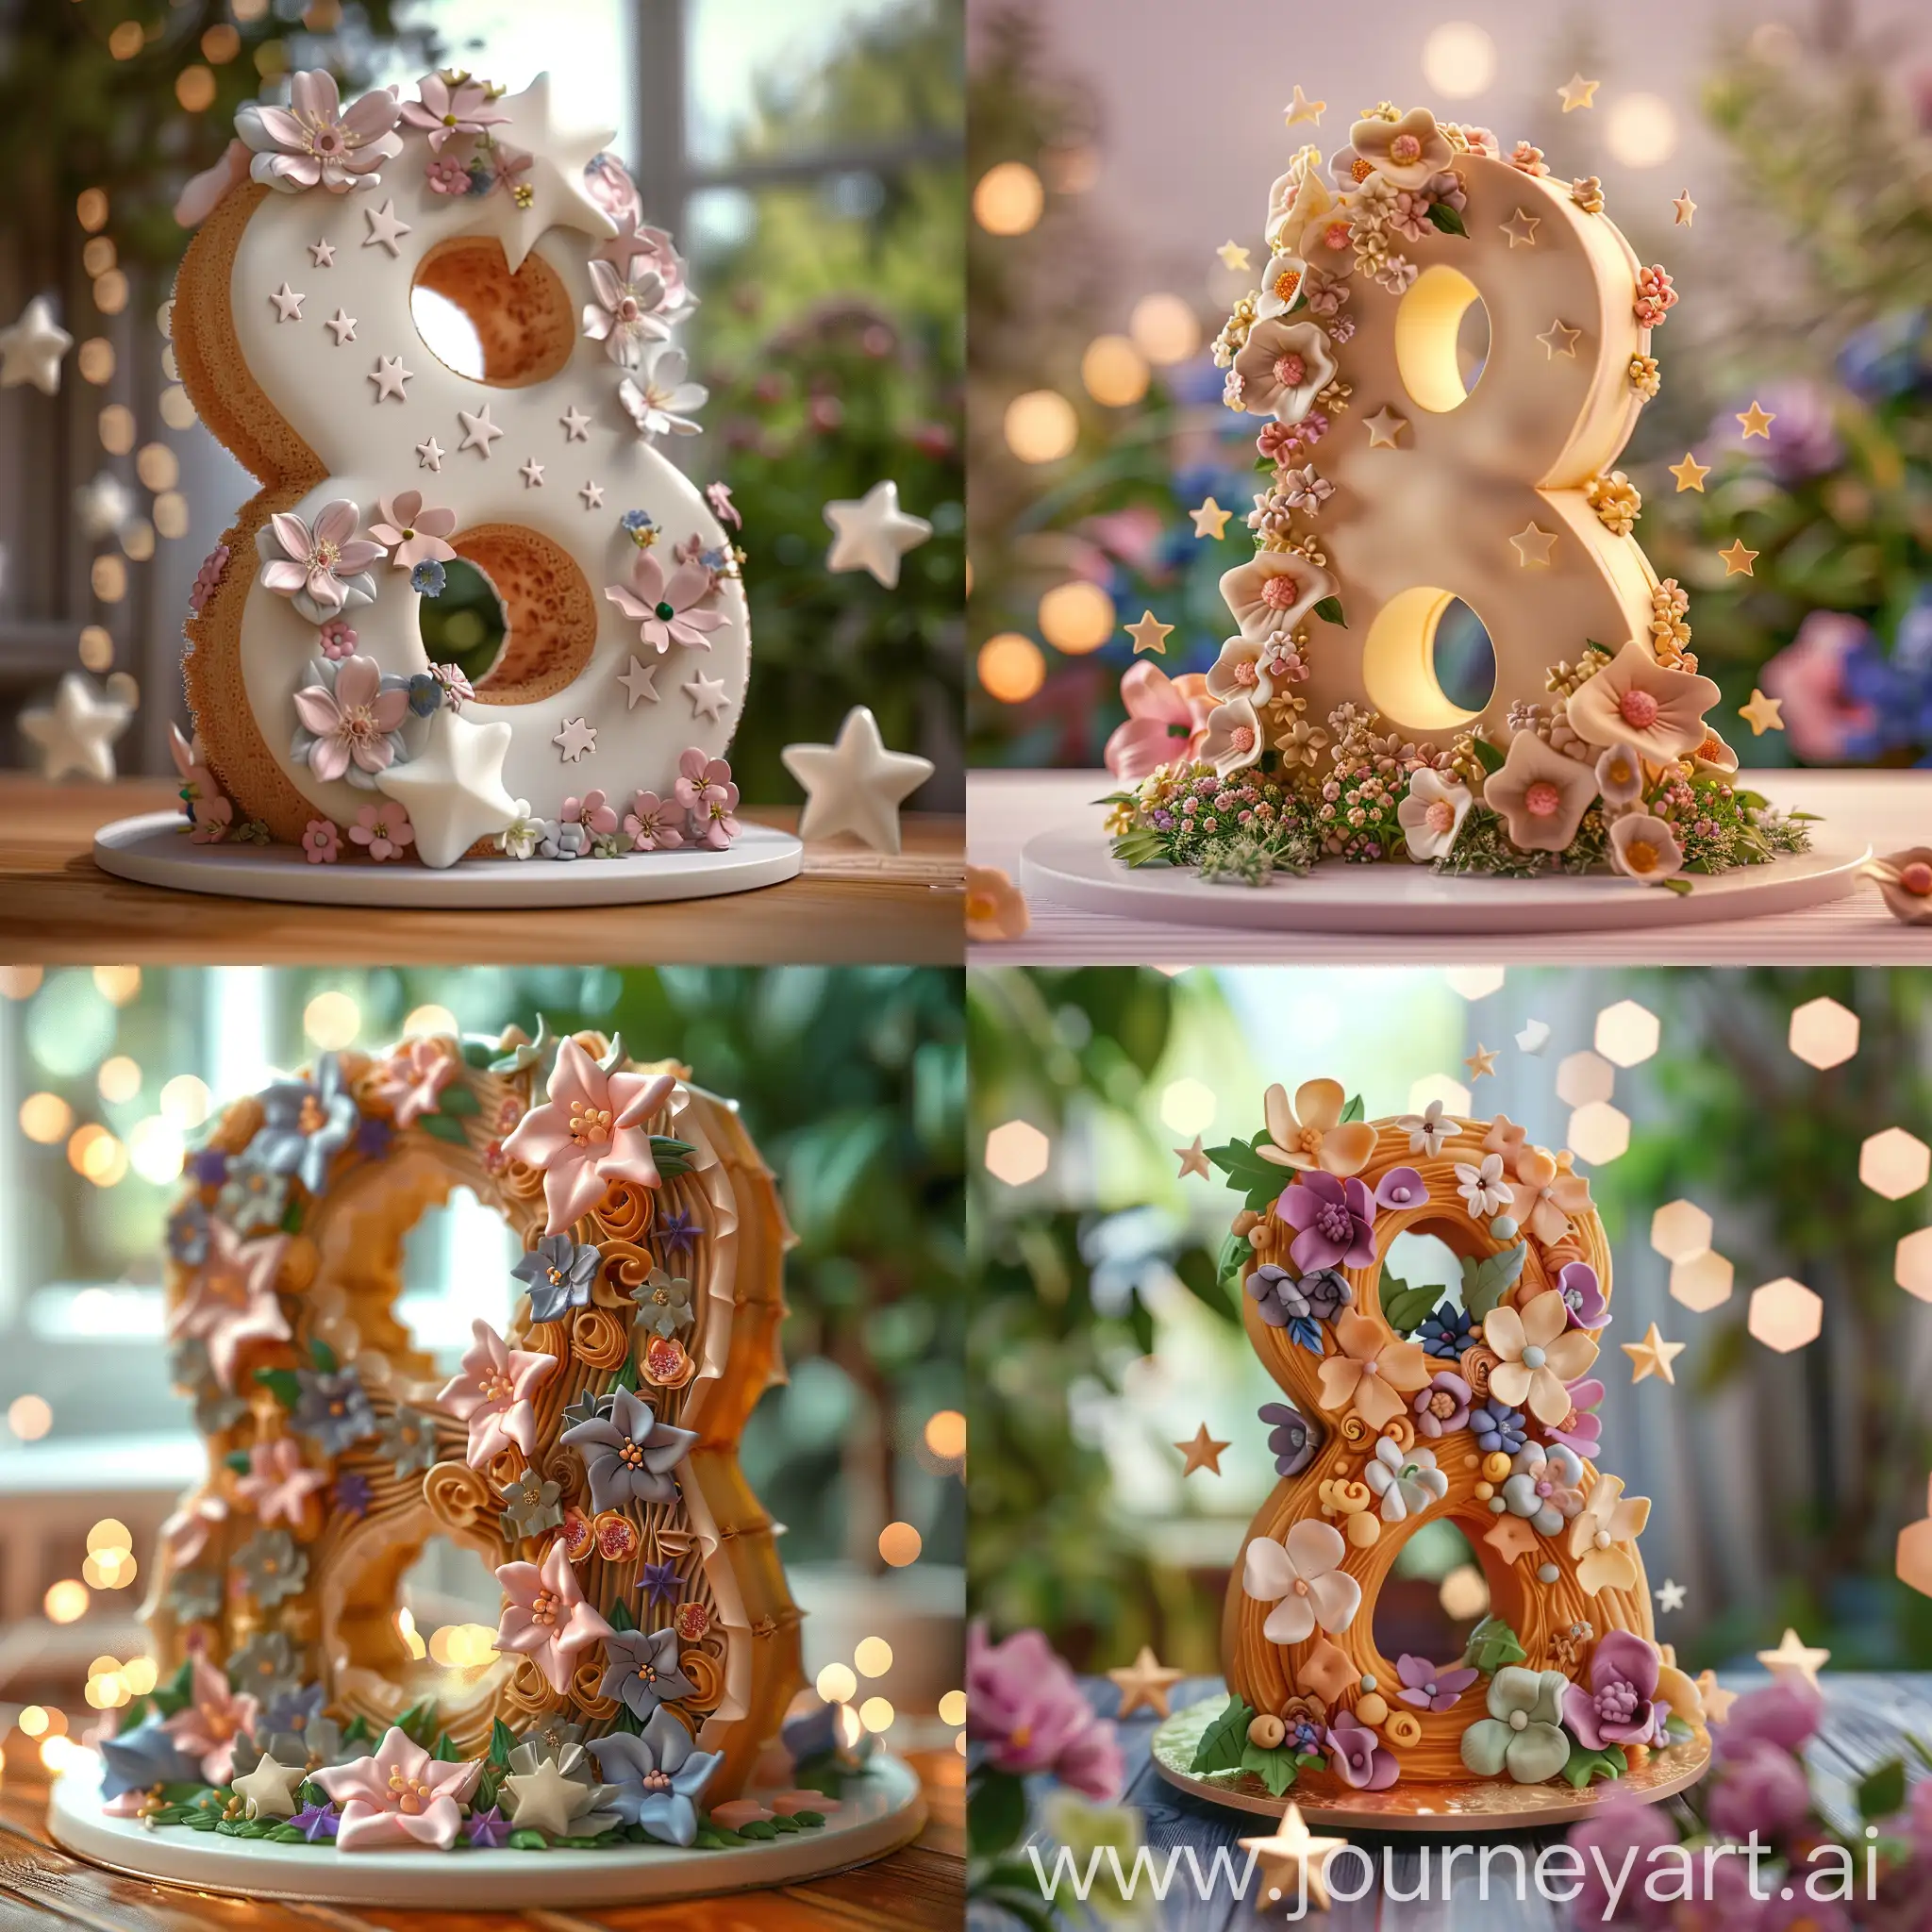 3d cake in the shape of a number eight, with flower decorations, 3d stars around, detalised, blured background